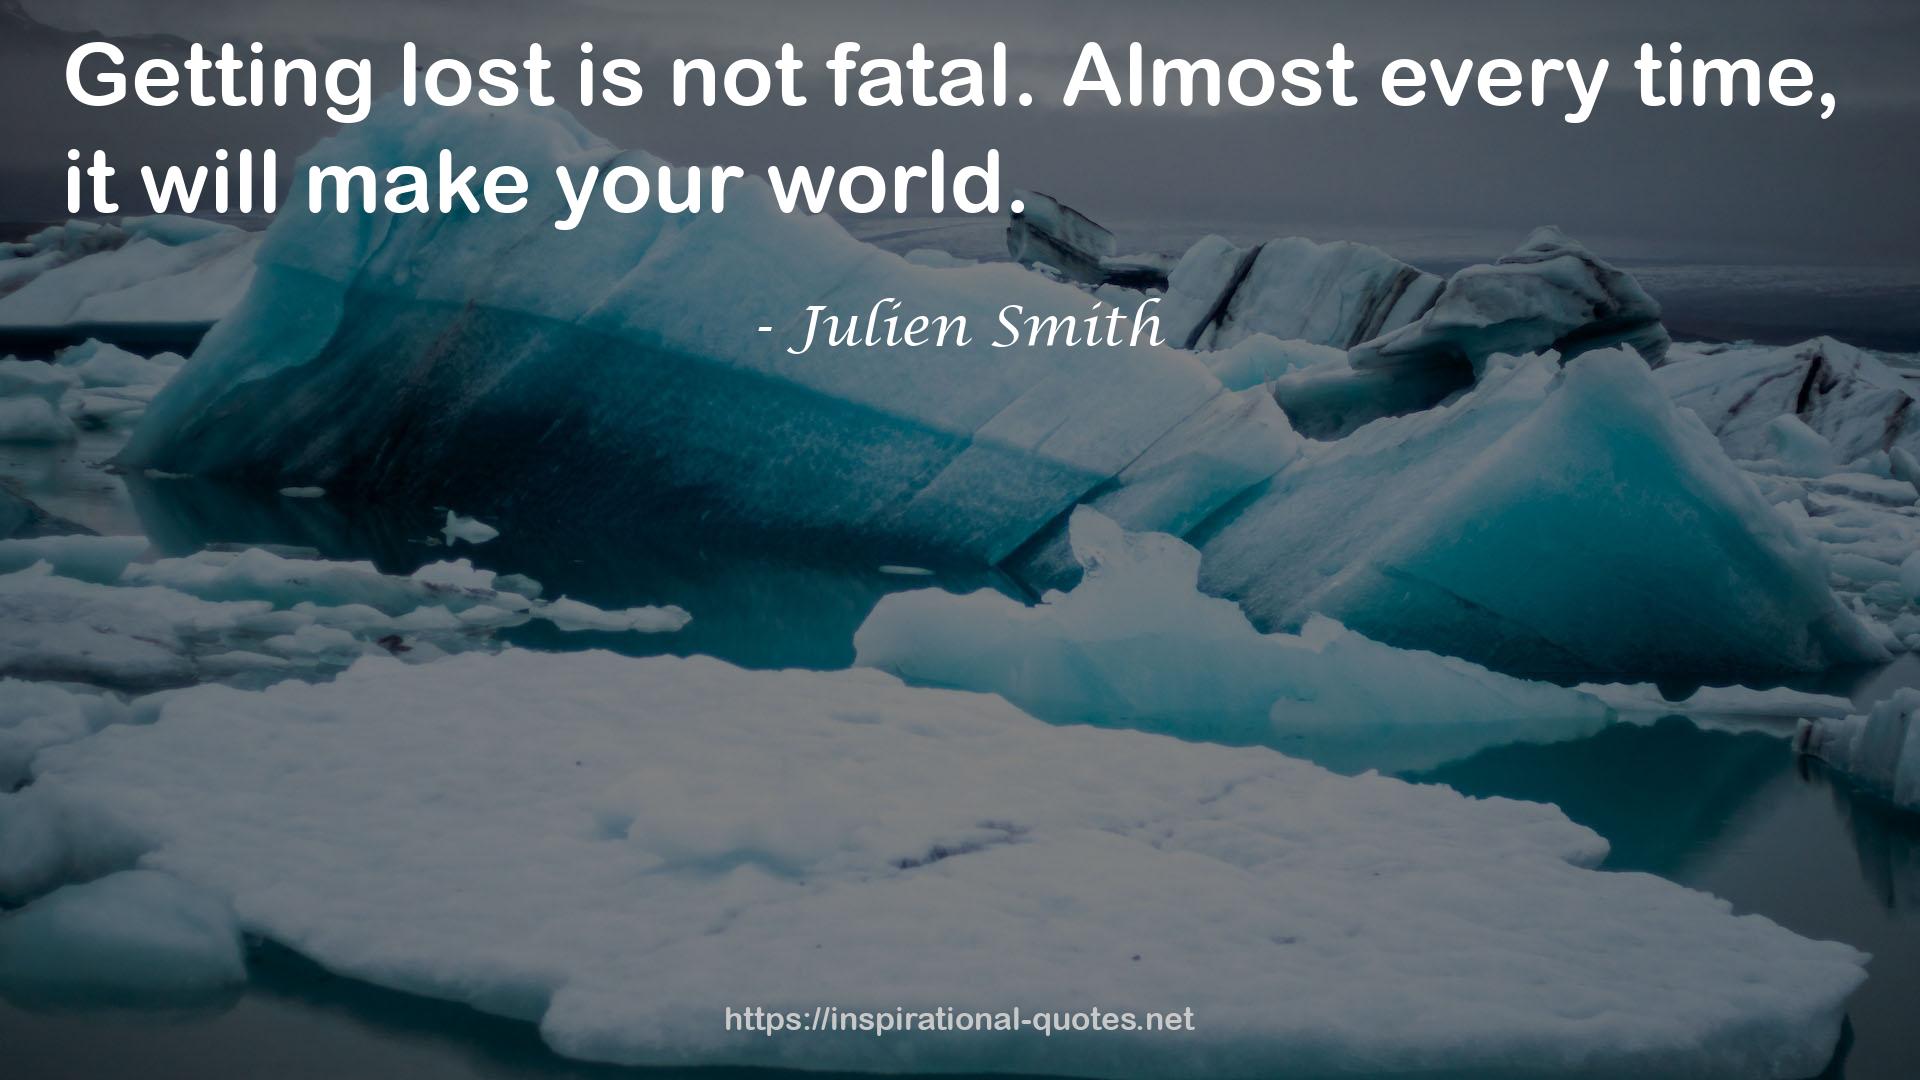 Julien Smith QUOTES